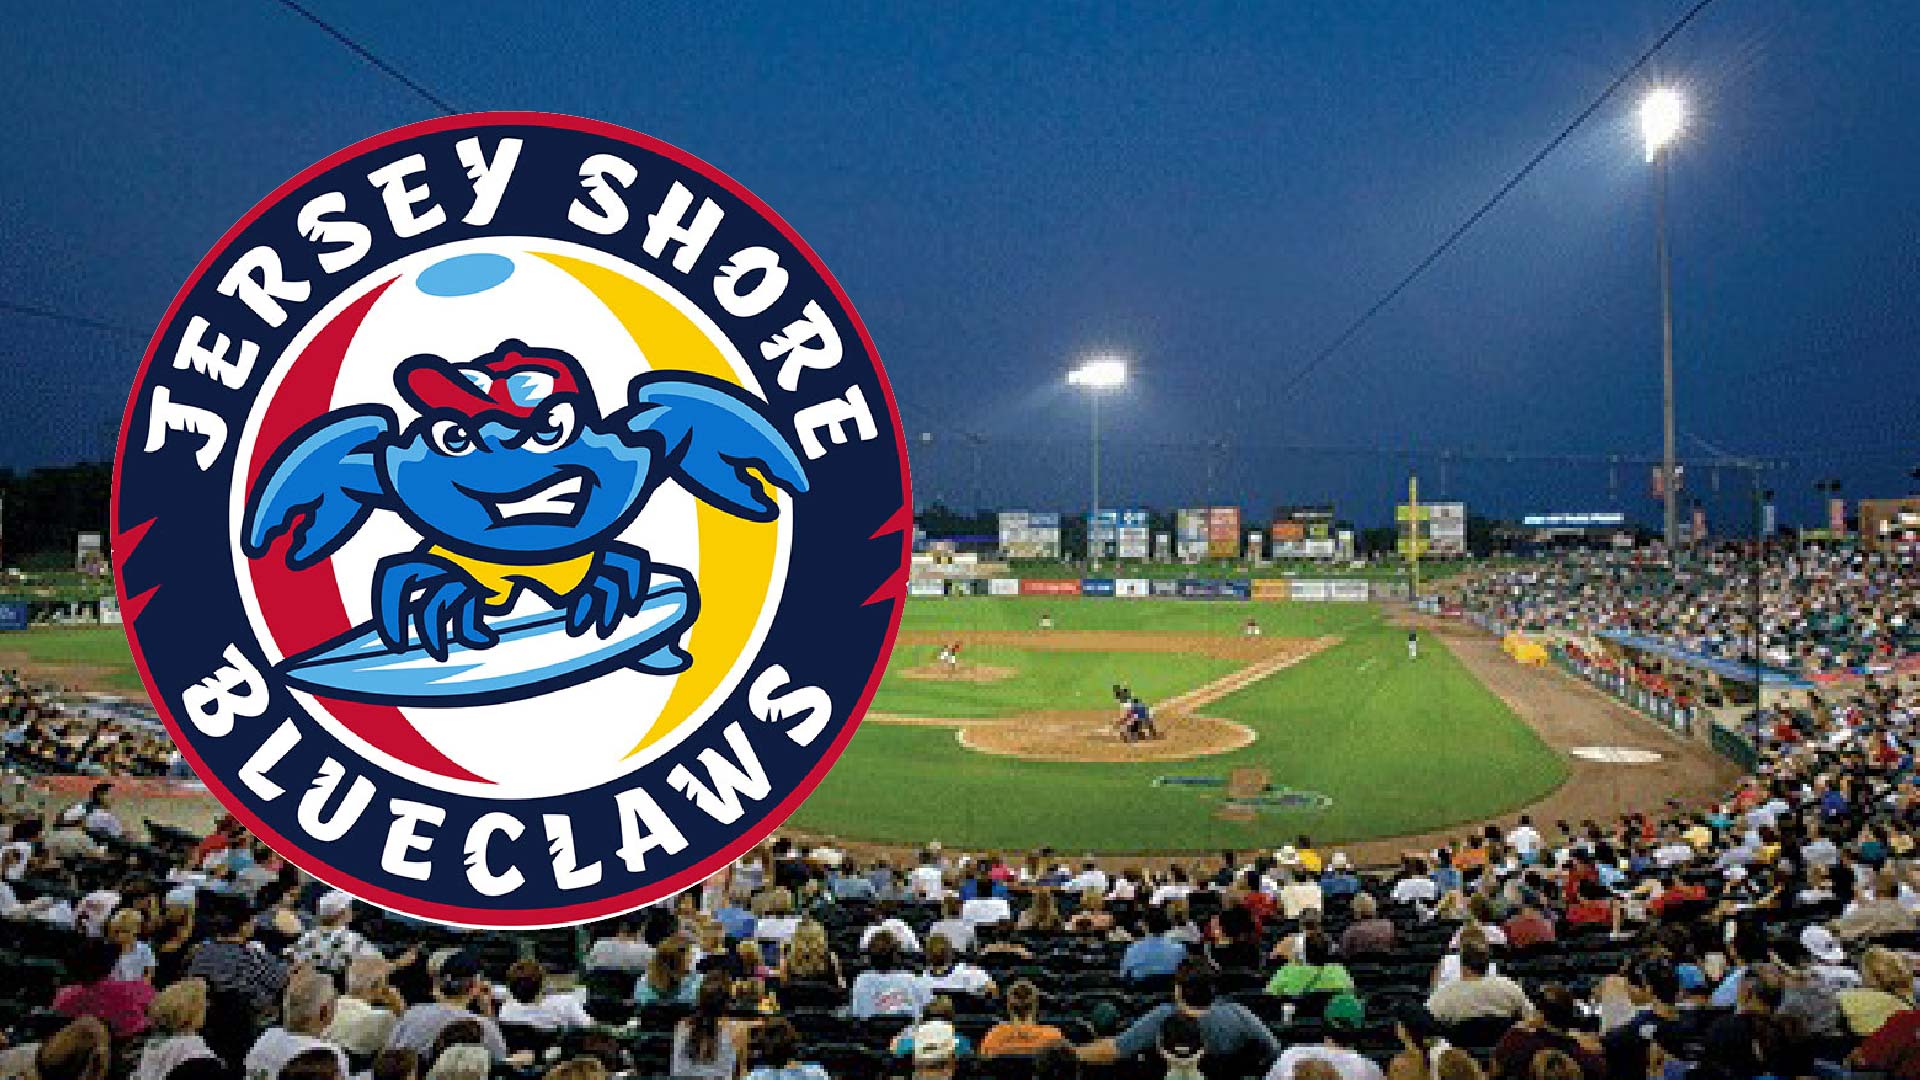 Jersey Shore Blueclaws event banner